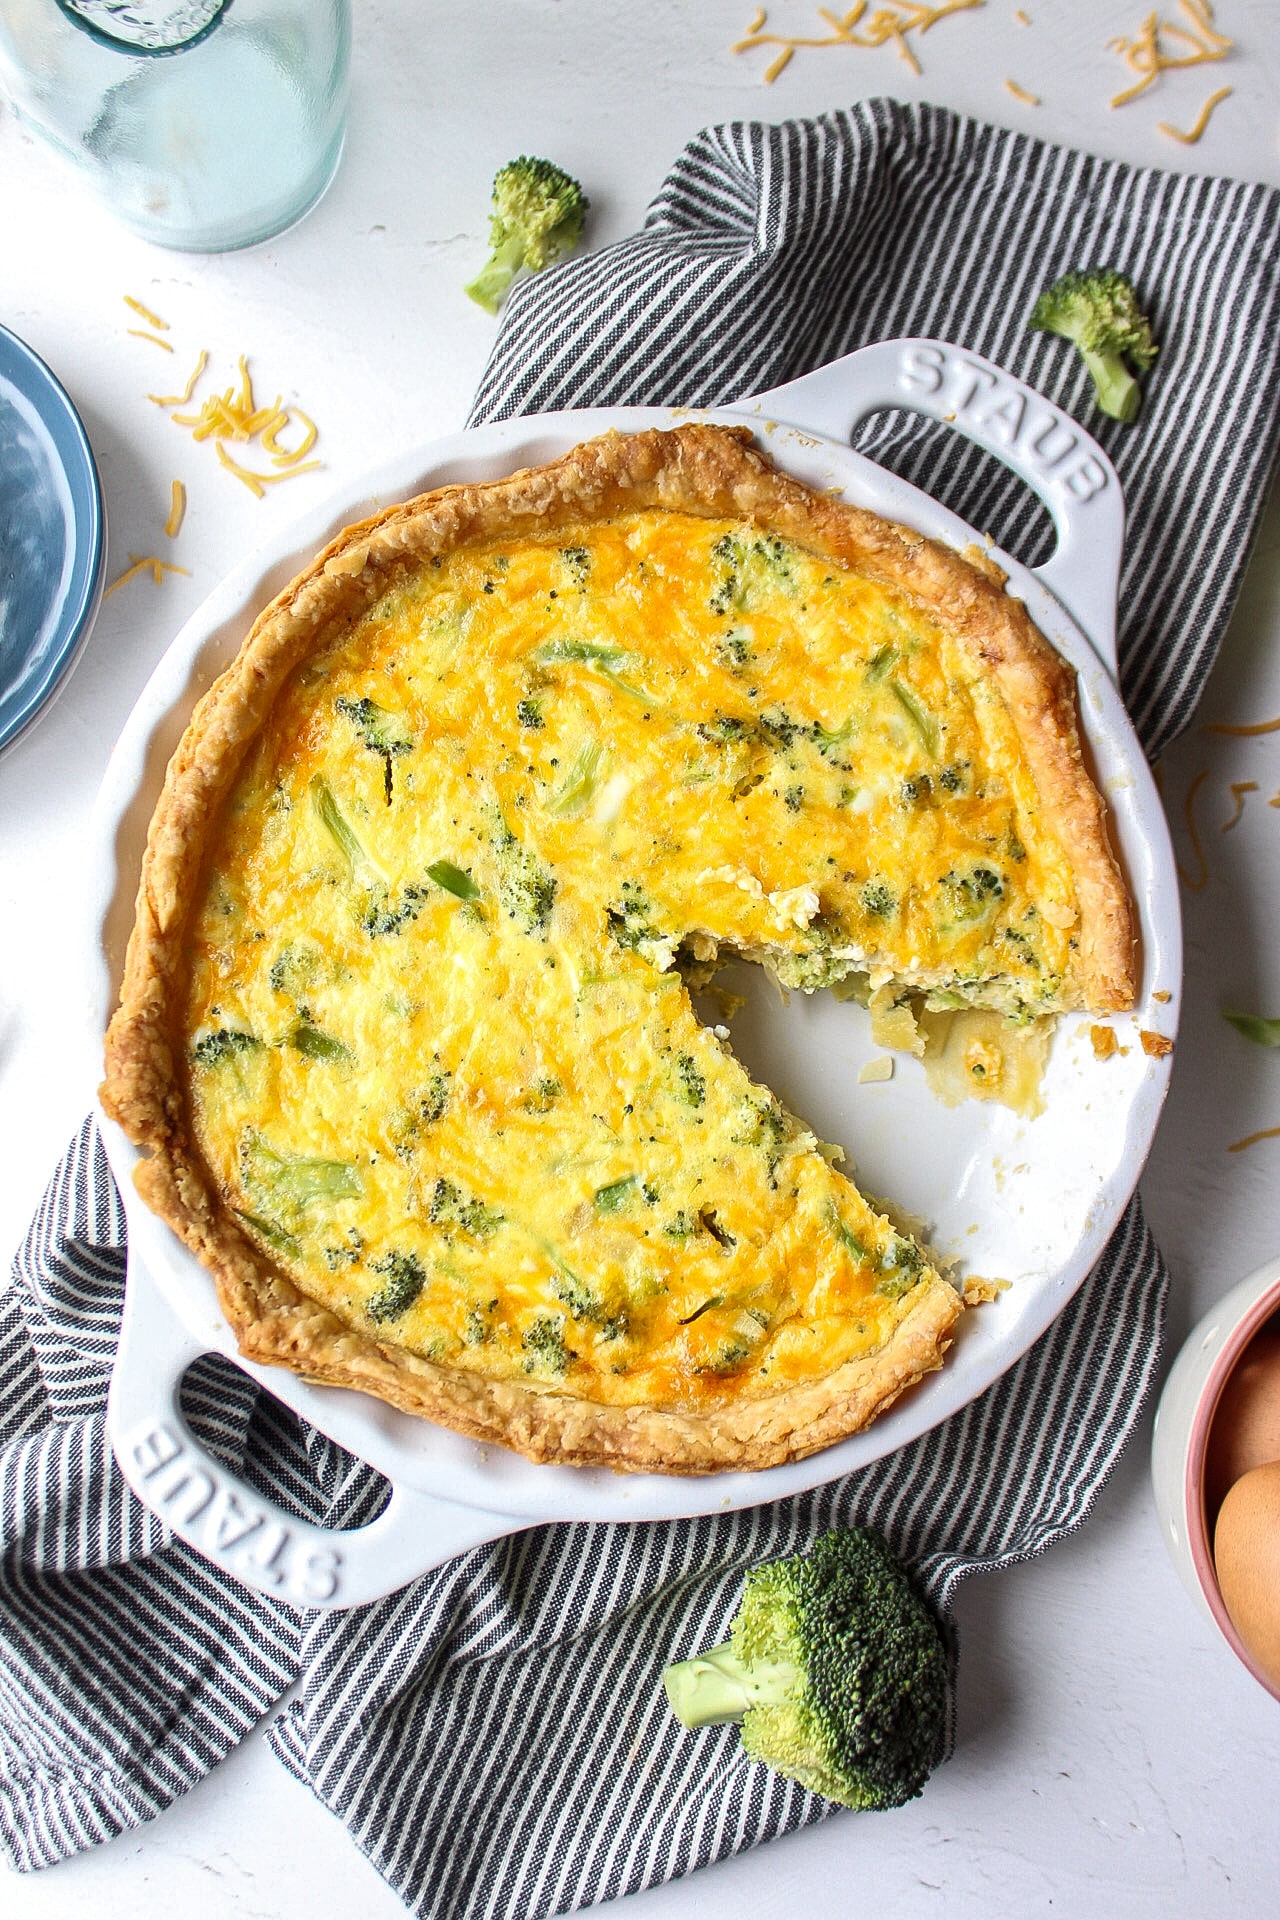 picture of a broccoli cheddar quiche with a slice cut out